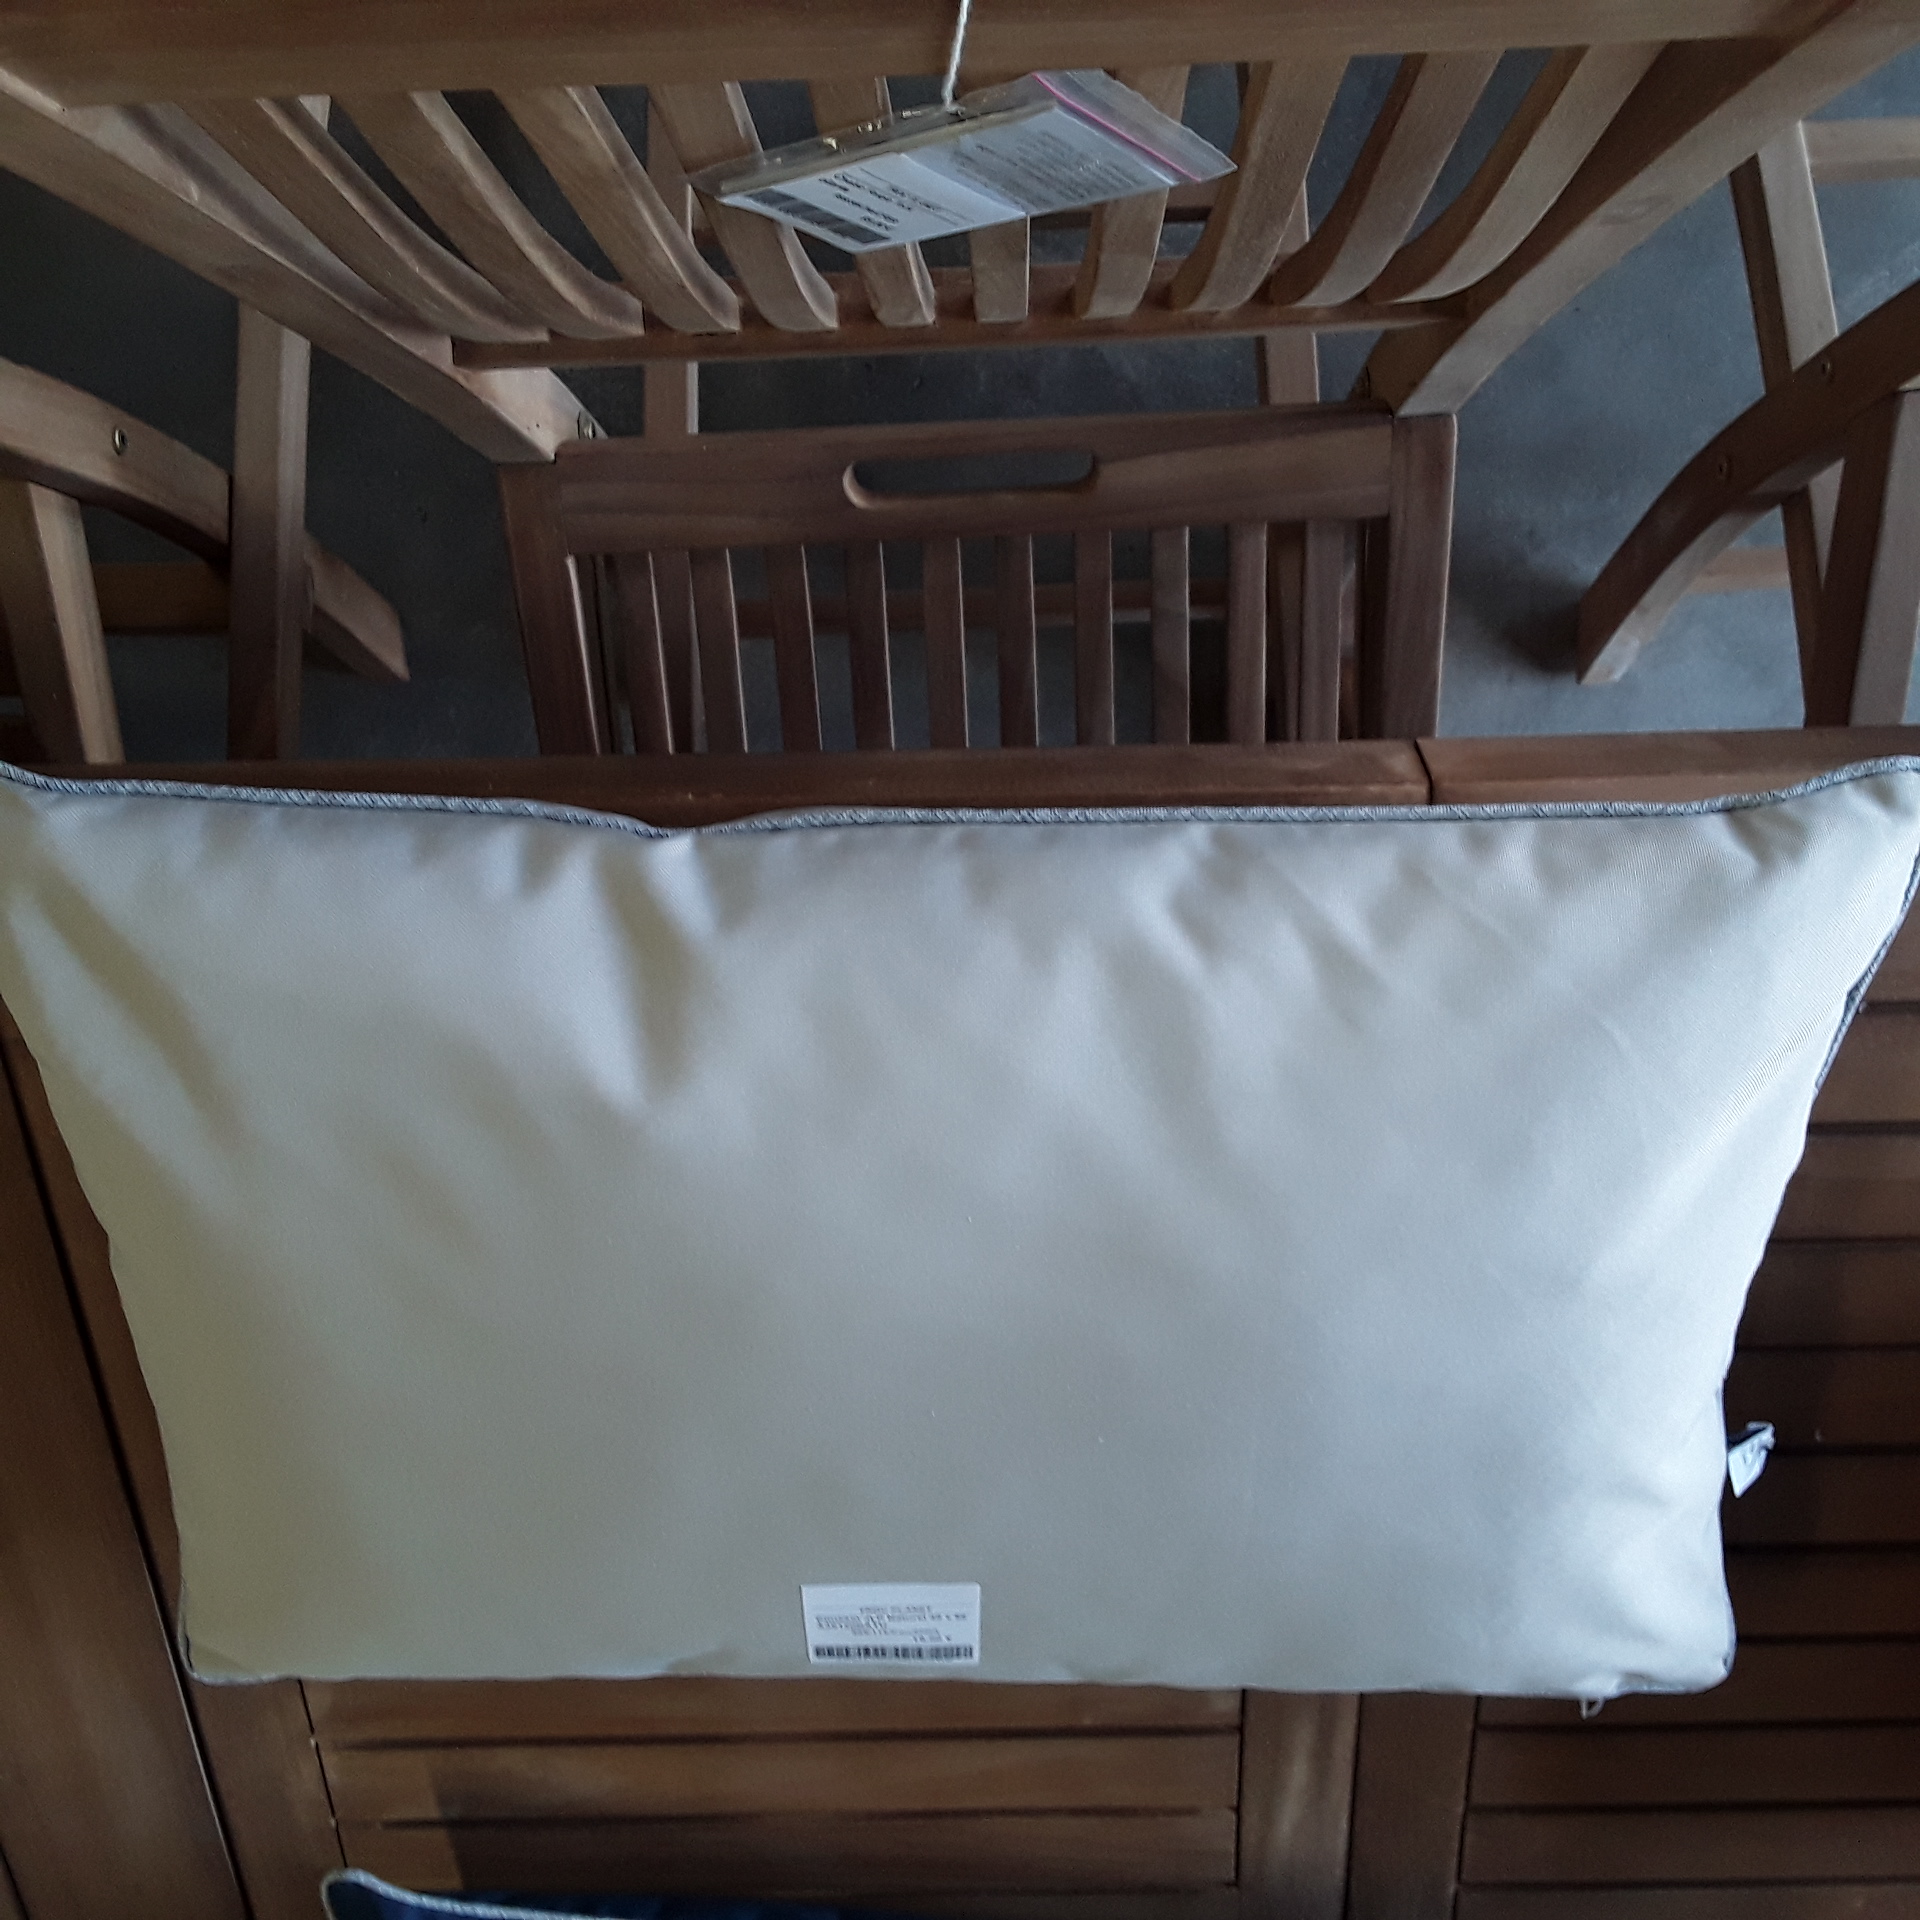 <p>Coussin JLP Naturel 40 x 60<br />A36120NATU<br />19,00 € T.T.C<br /><a href="/Article/4311?type=neuf" style="color:white;" target="_blank">Lien vers l&#39;article</a></p>